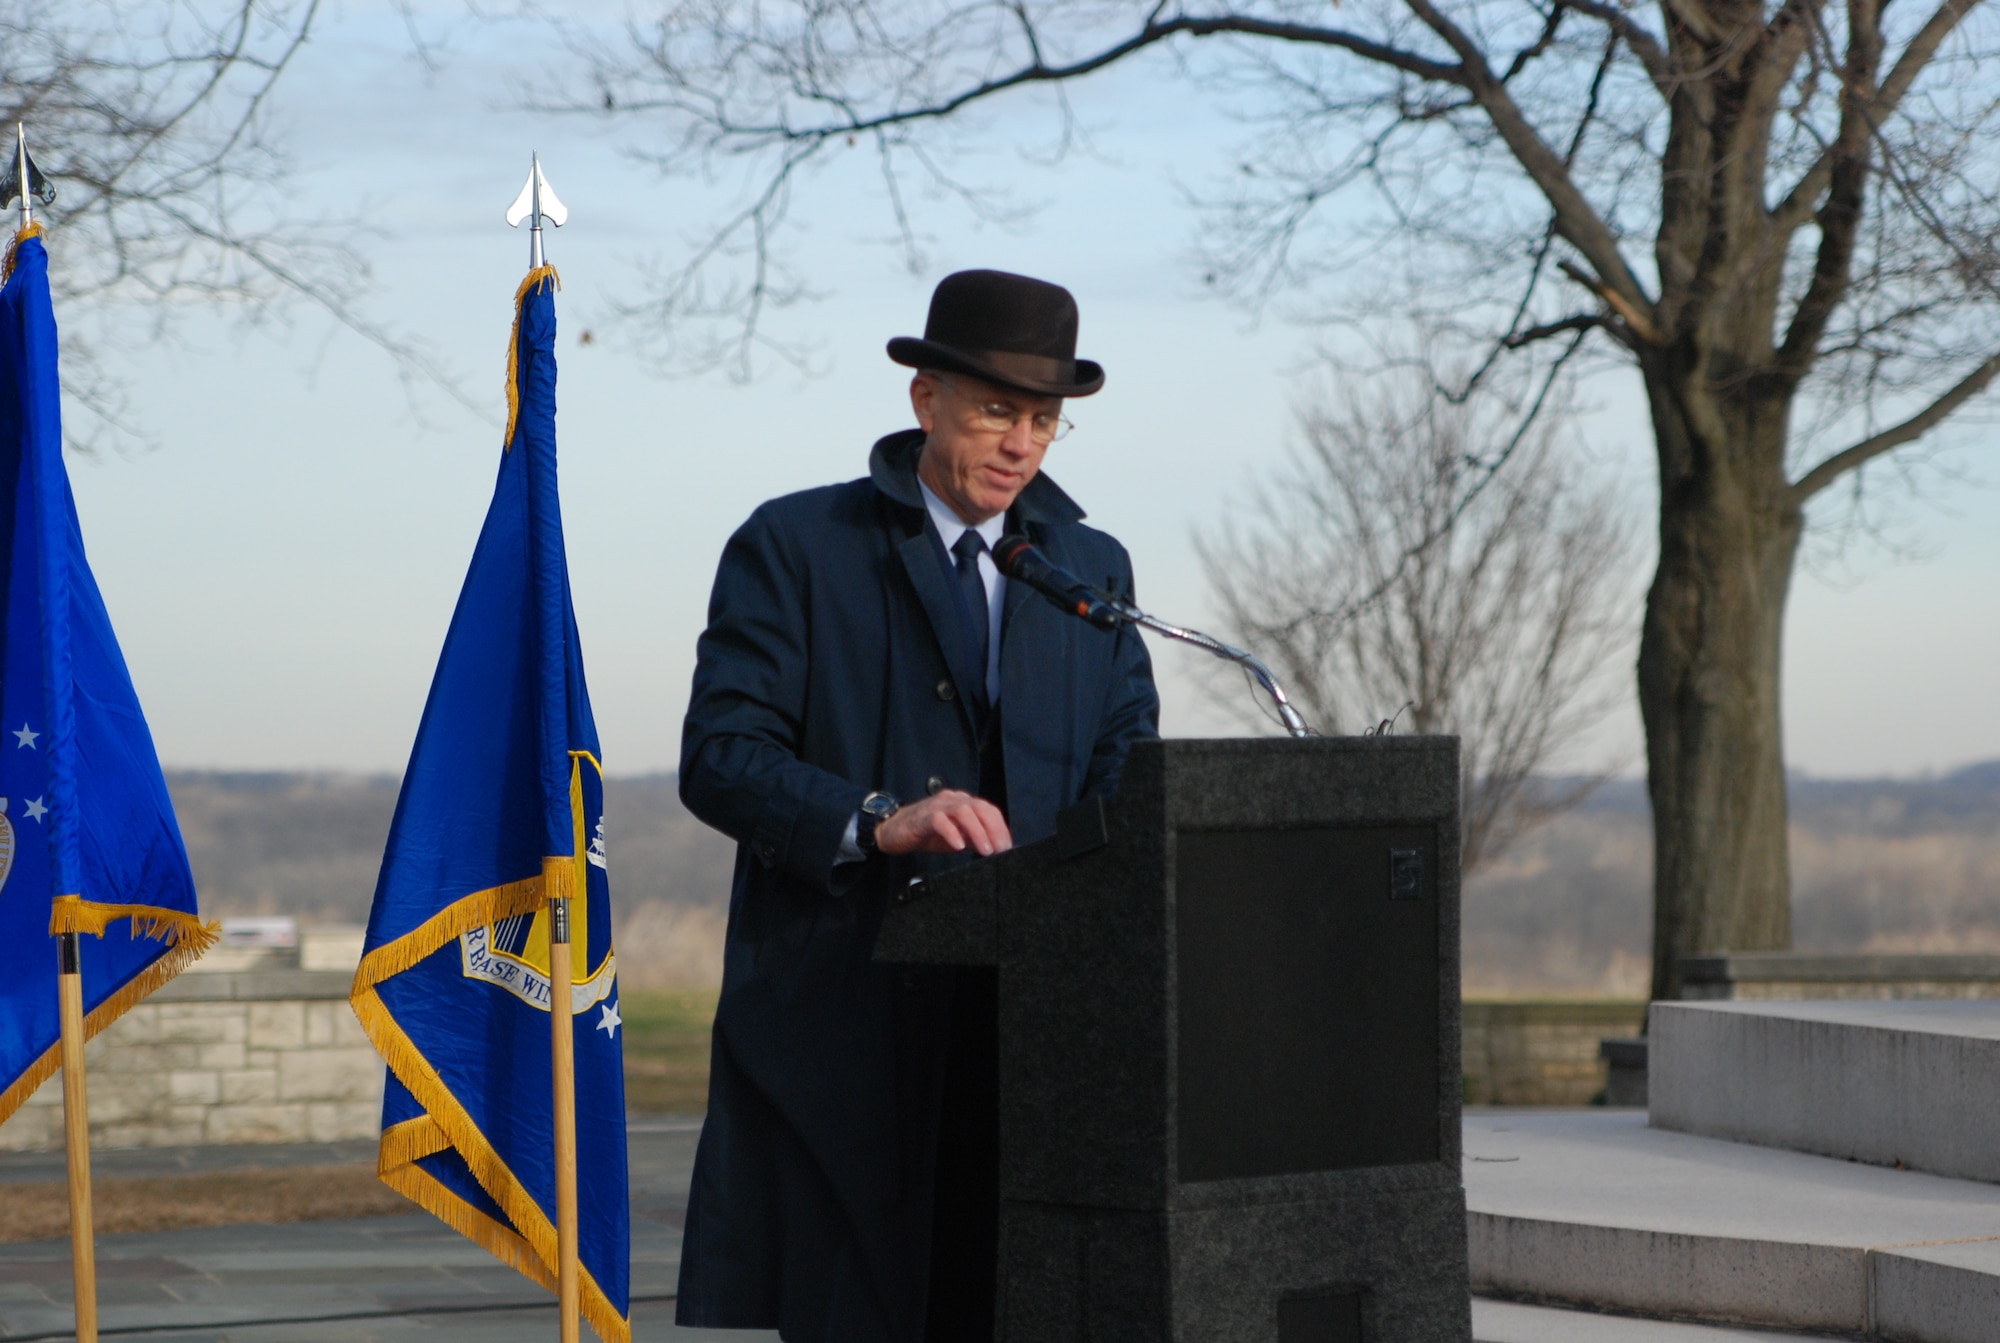 After donning a costume reminiscent of the turn of the century, Brig. Gen. Paul Sampson tells the story of Dayton, Ohio’s most famous inventors, Wilbur and Orville Wright, during a ceremony Dec. 17, 2009 at Wright-Patterson Air Force Base. The general was keynote speaker for a ceremony marking the 106th anniversary of the Wright Brothers' first powered flight.  Brig. Gen. Sampson is mobilization assistant to the commander of Aeronautical Systems Center. (U.S. Air Force photo/Bonnie White)